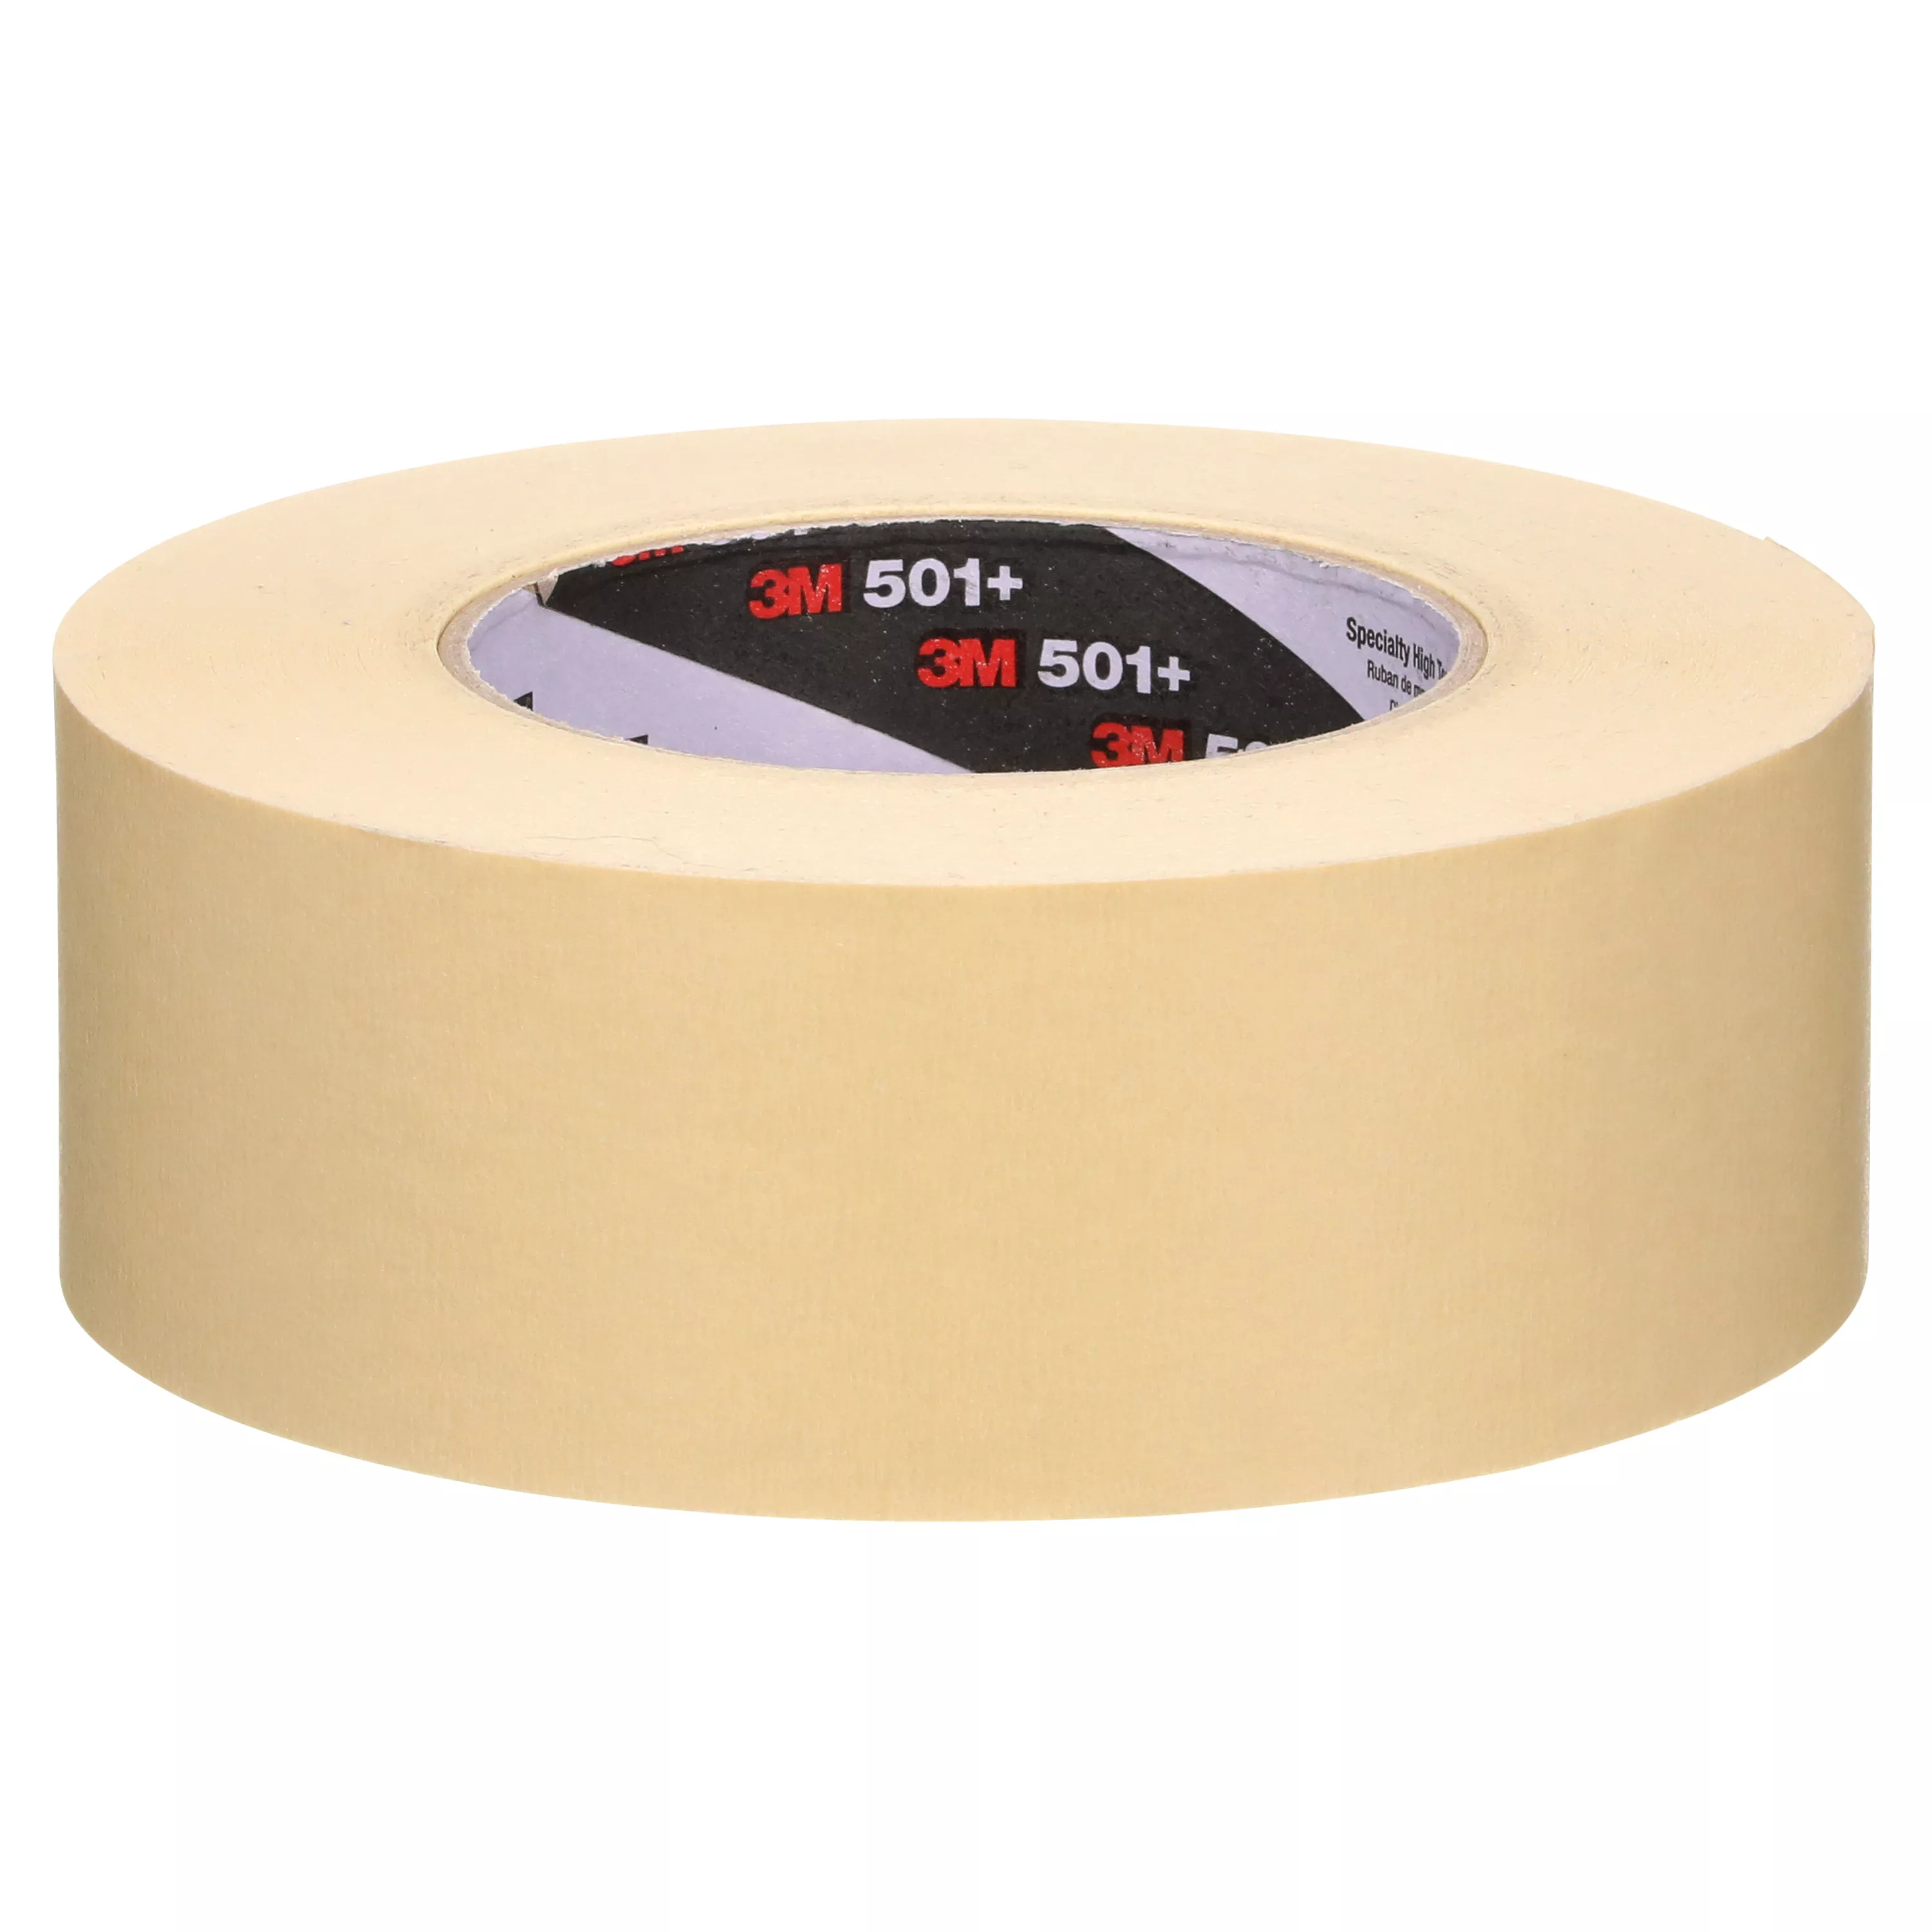 SKU 7000138488 | 3M™ Specialty High Temperature Masking Tape 501+